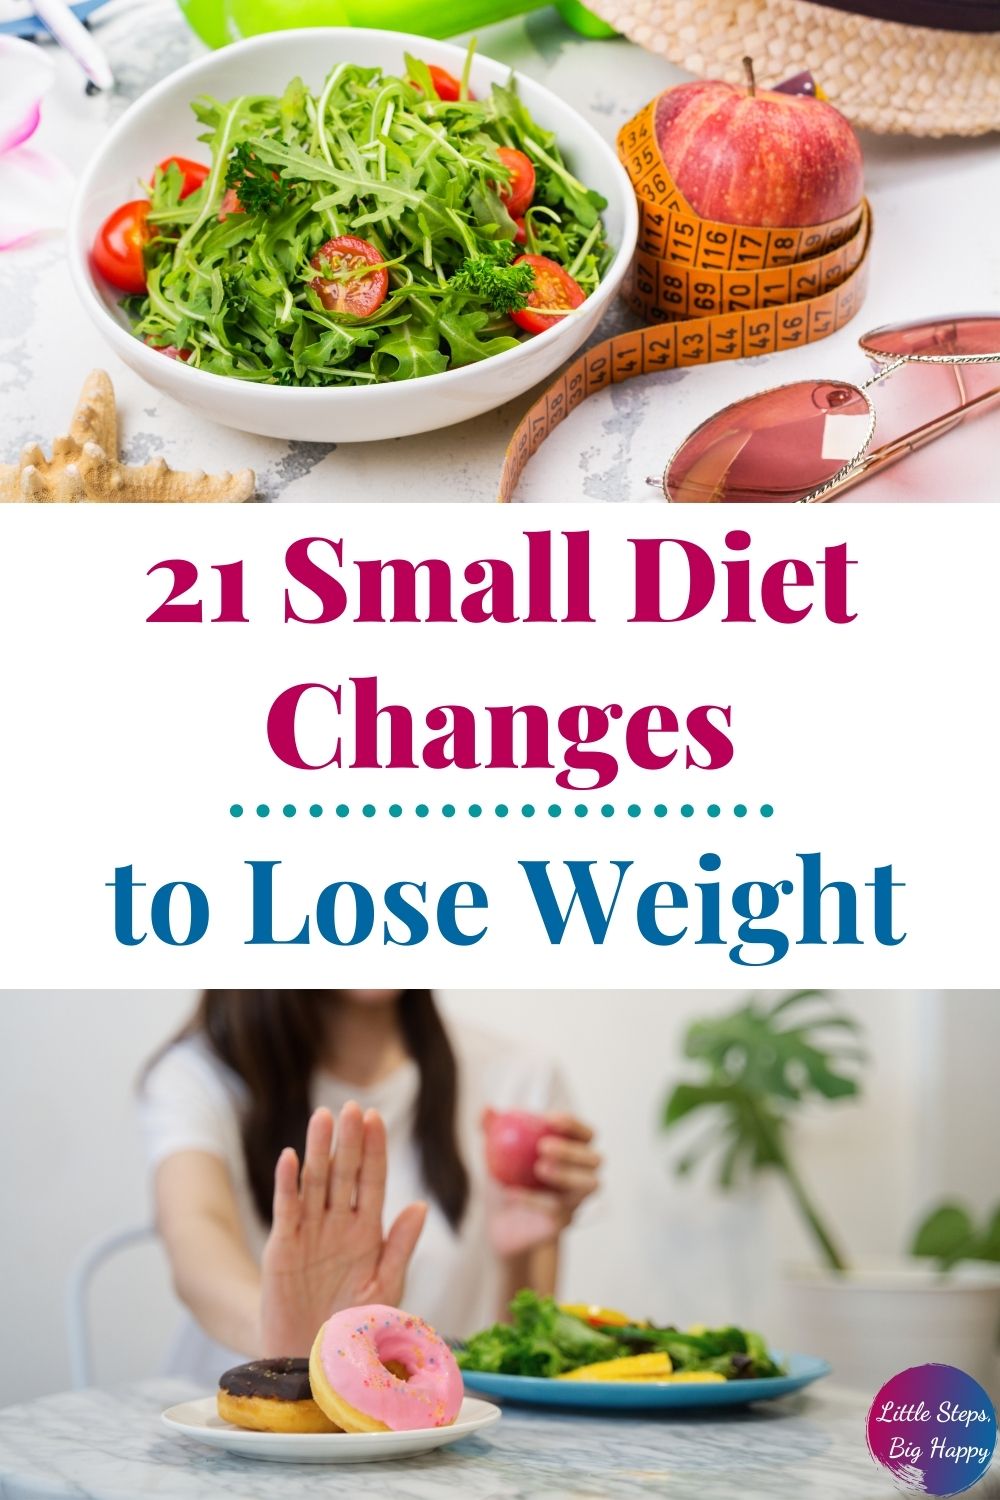 A picture of a salad and apple over the text 21 Samll Diet Changes to Lose Weight. Picture of a woman below pushing away two donuts on a plate.